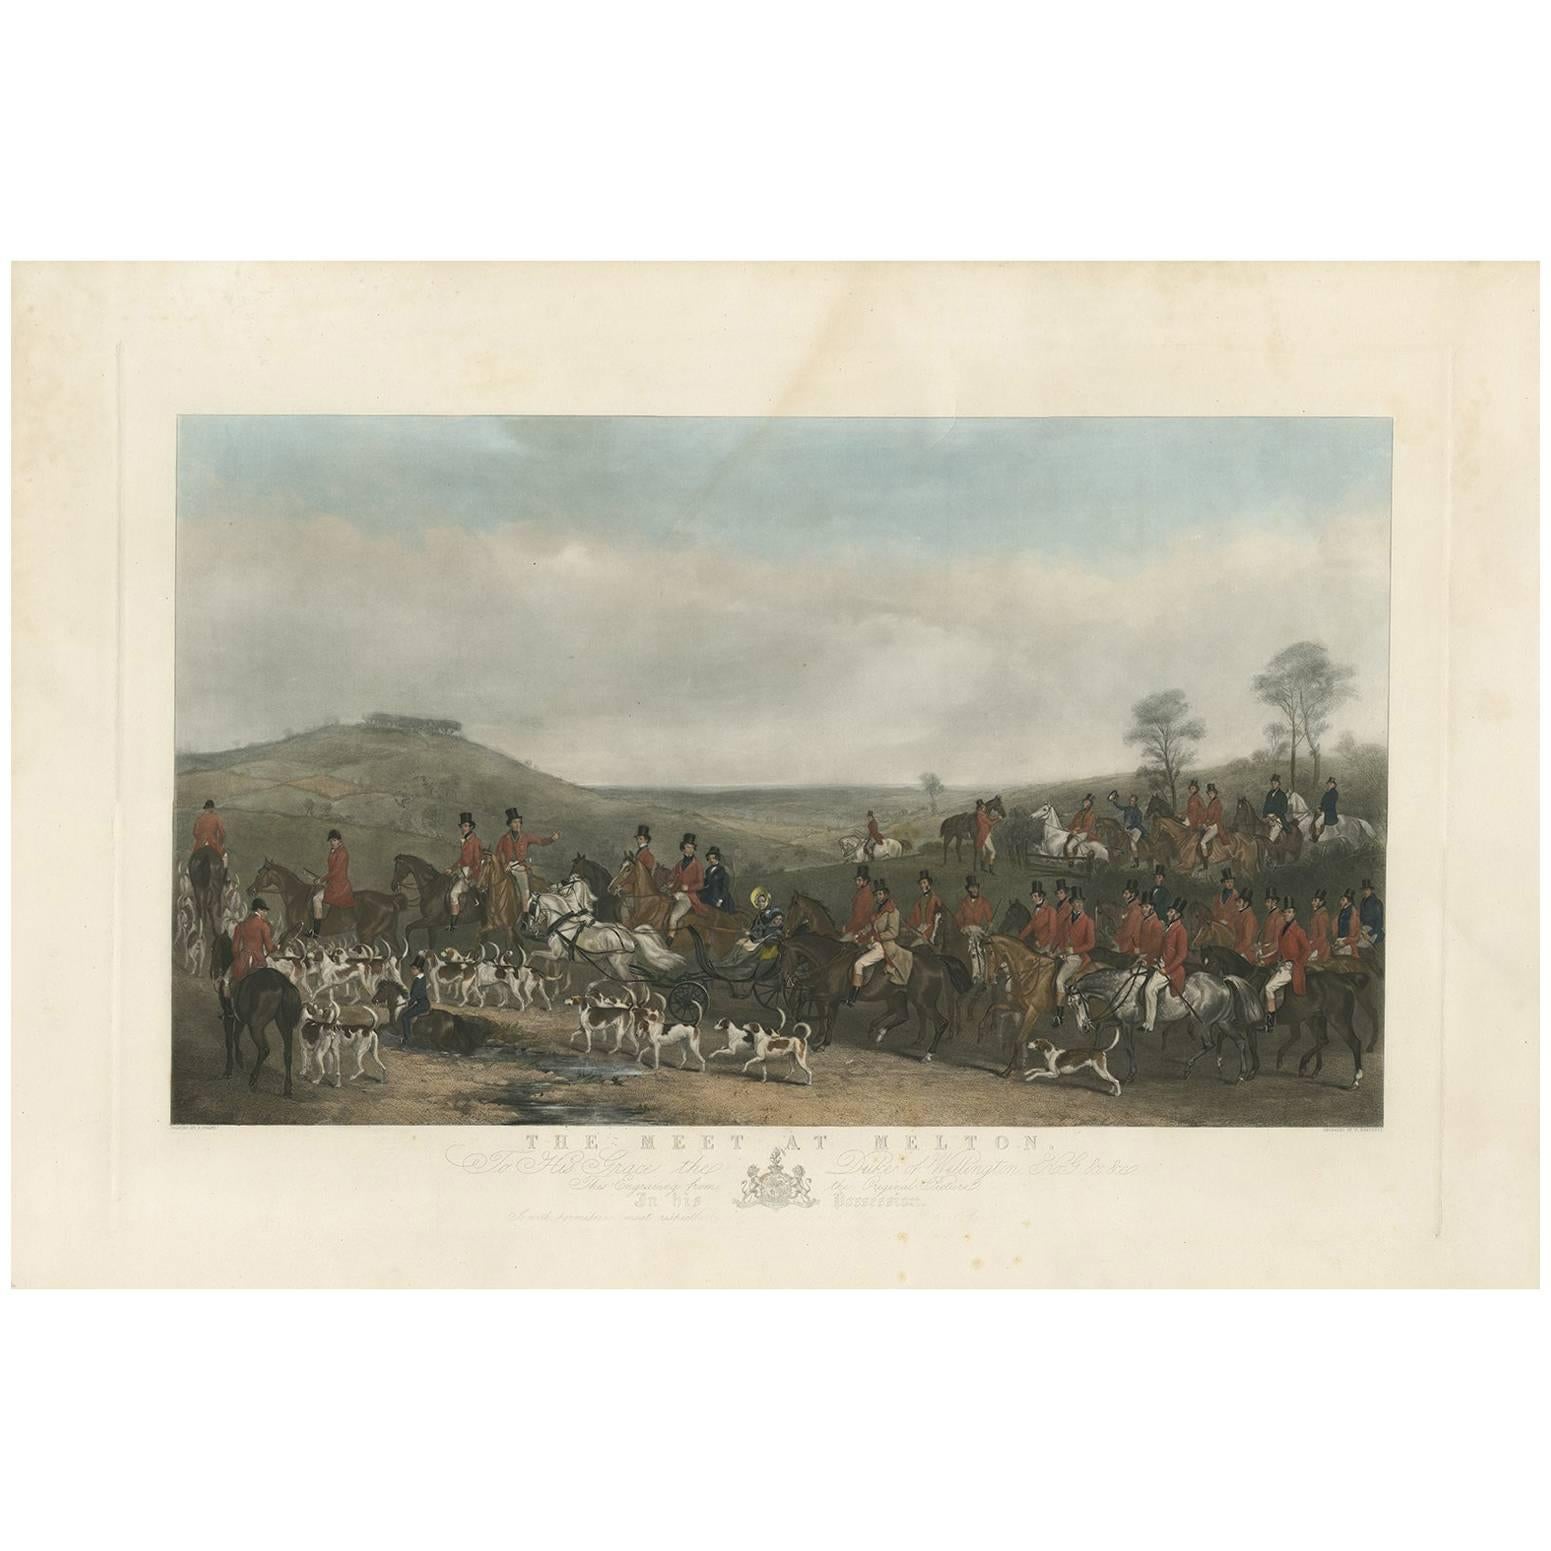 Antique English Hunting Print 'The Meet at Melton' by W. Humphrys, circa 1840